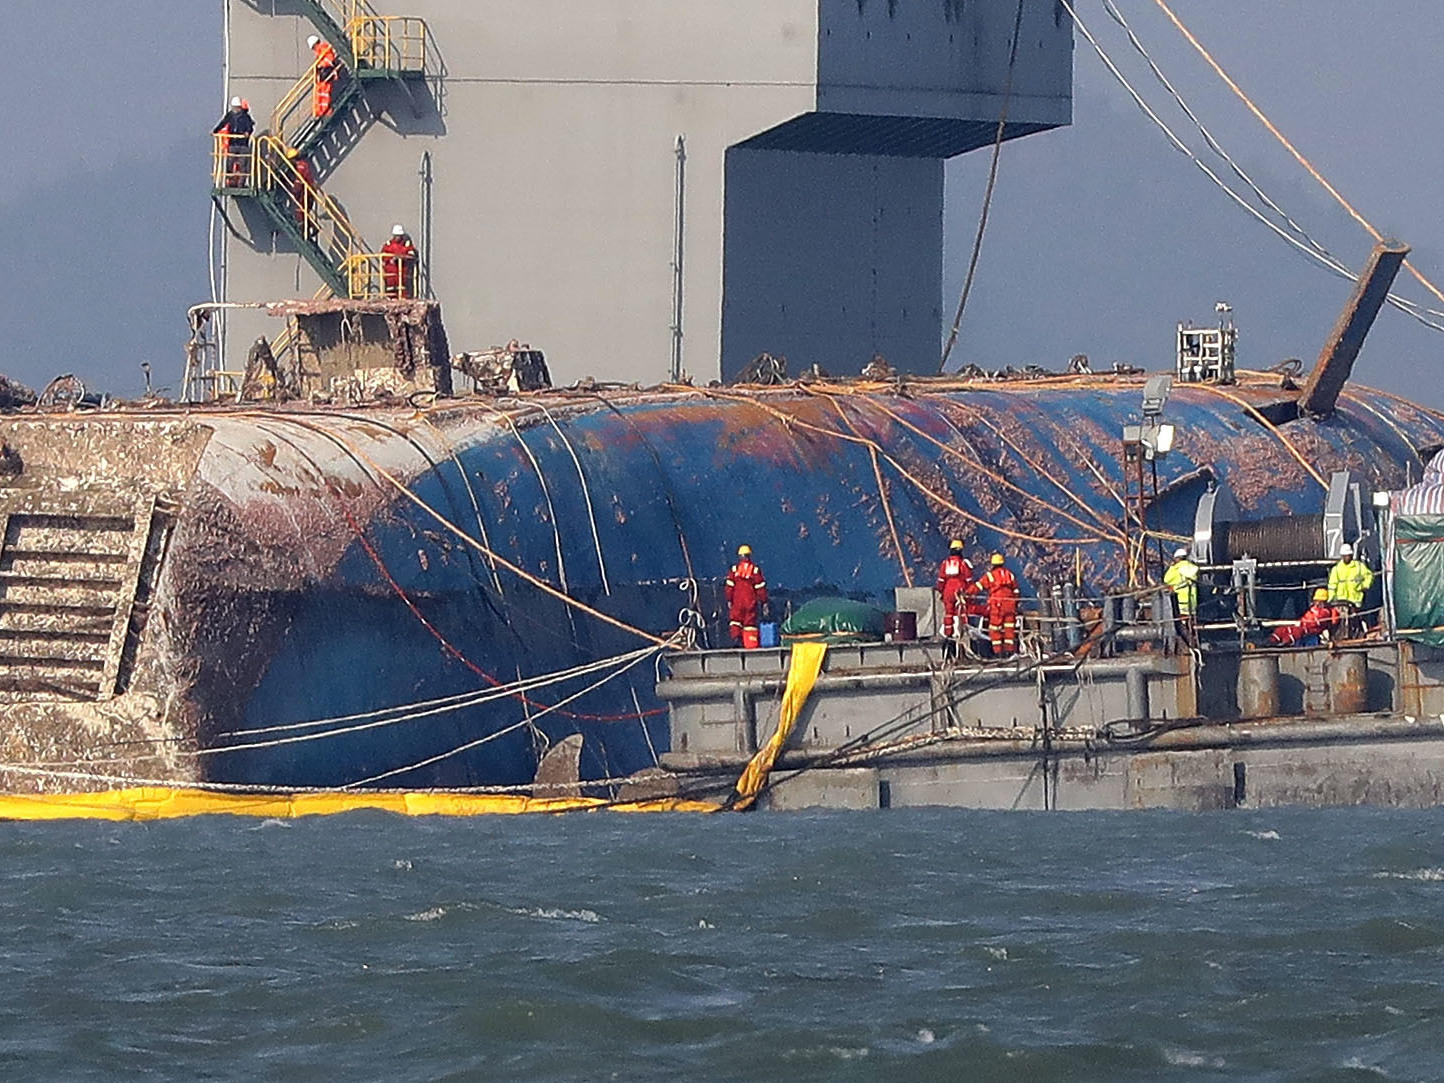 South Korea Tries To Raise Sewol Ferry Nearly 3 Years After